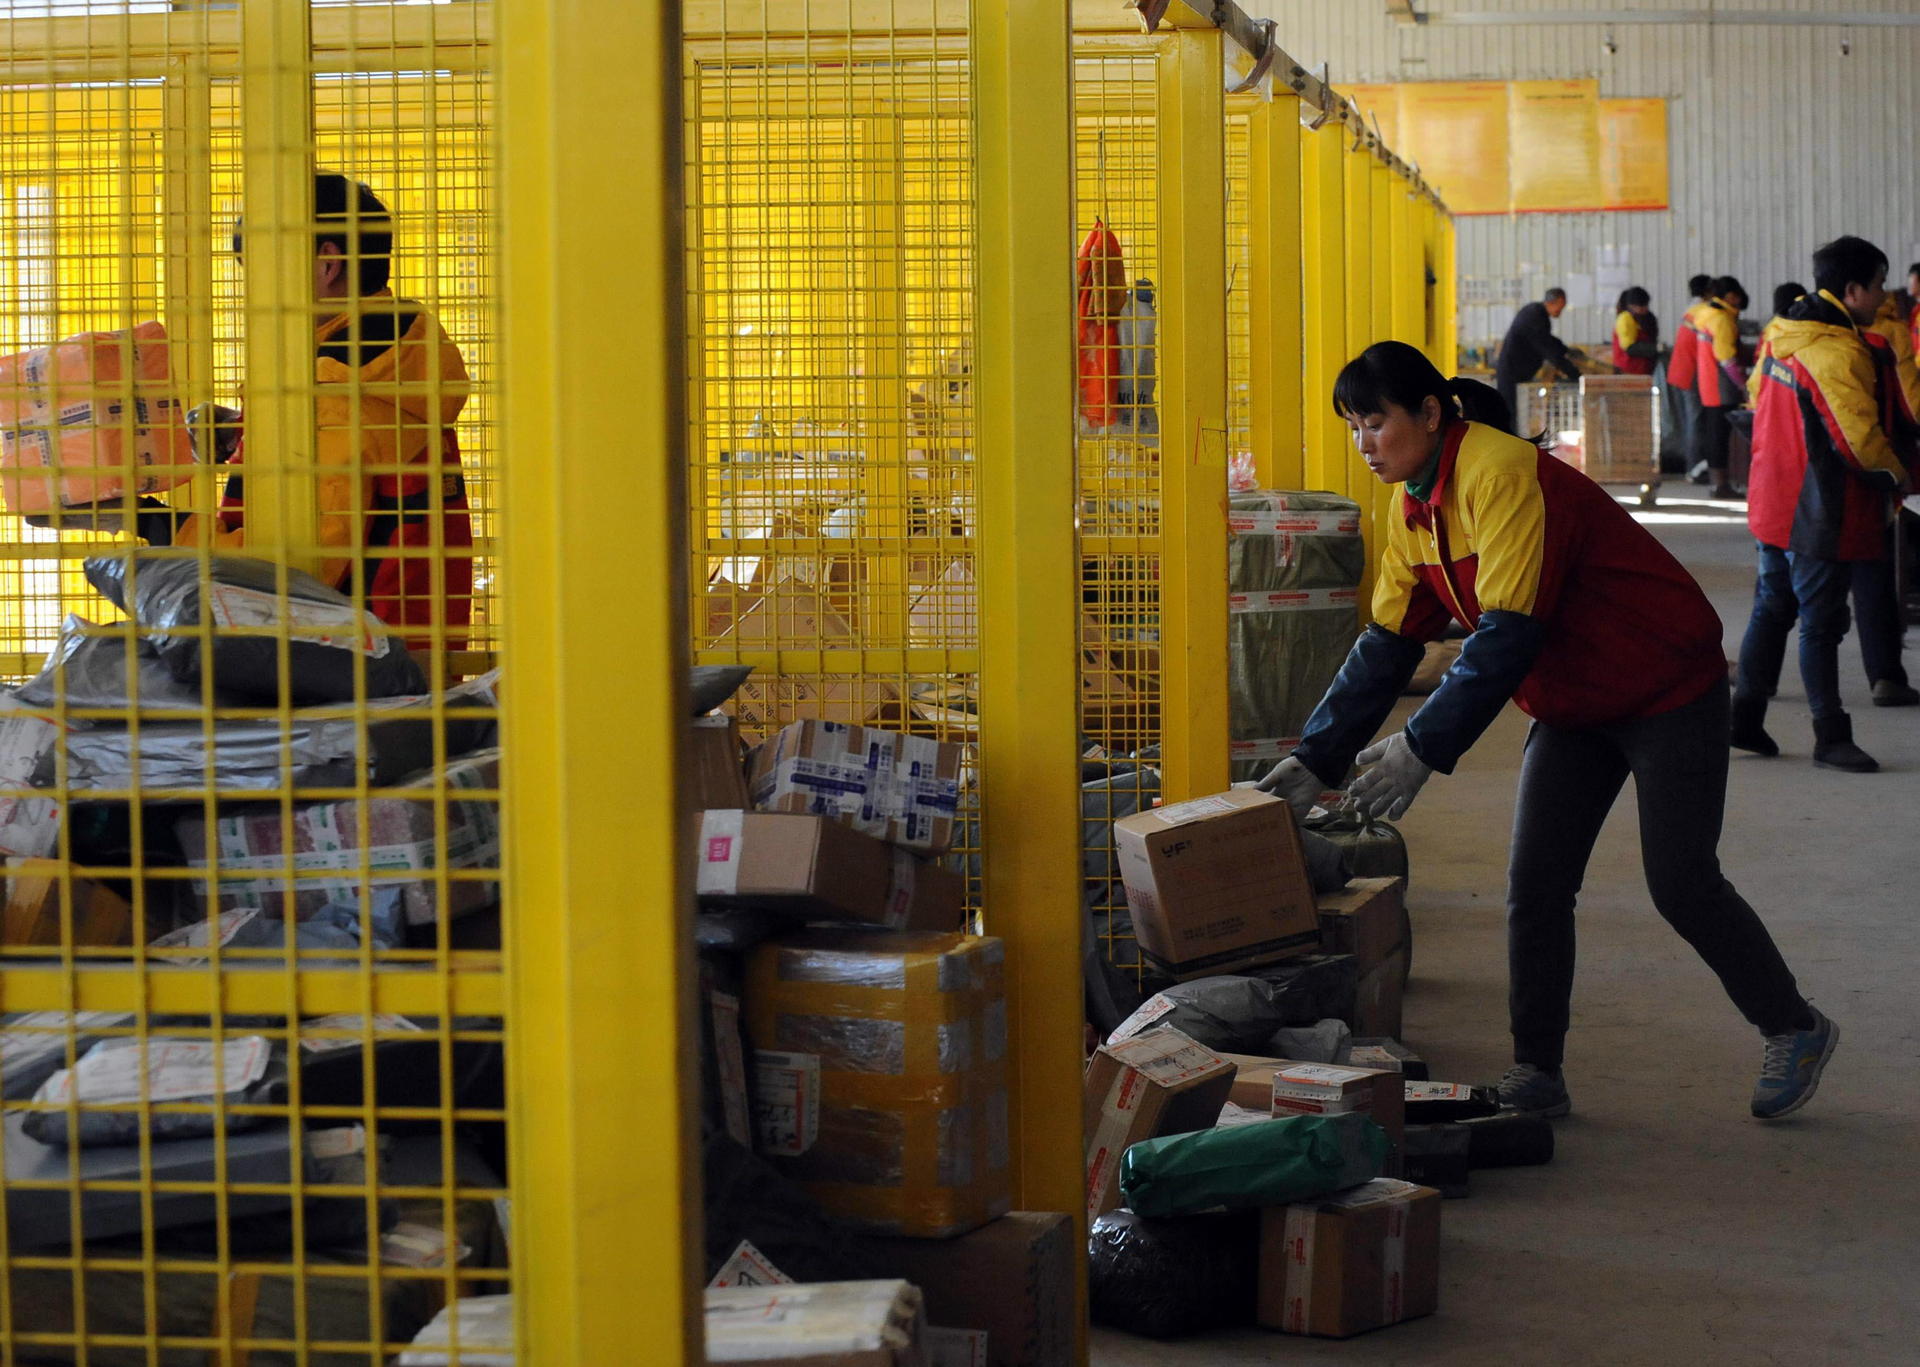 China's express delivery companies delivered 9.2 billion pieces of goods in 2013, up 61.5 per cent over 2012.